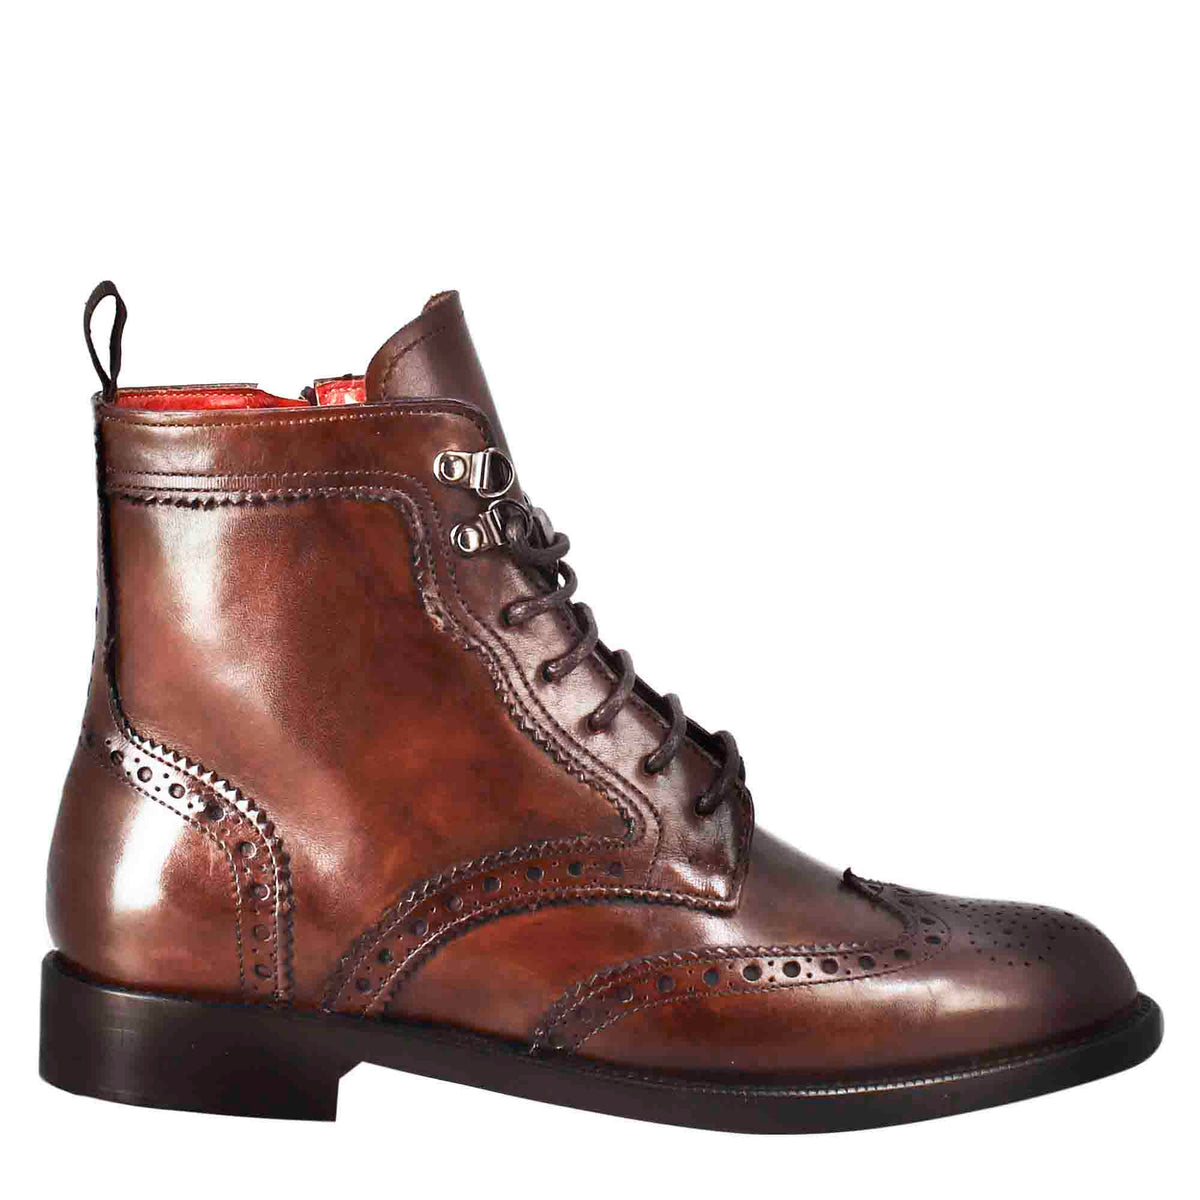 Women's amphibian with brogue details in dark brown leather